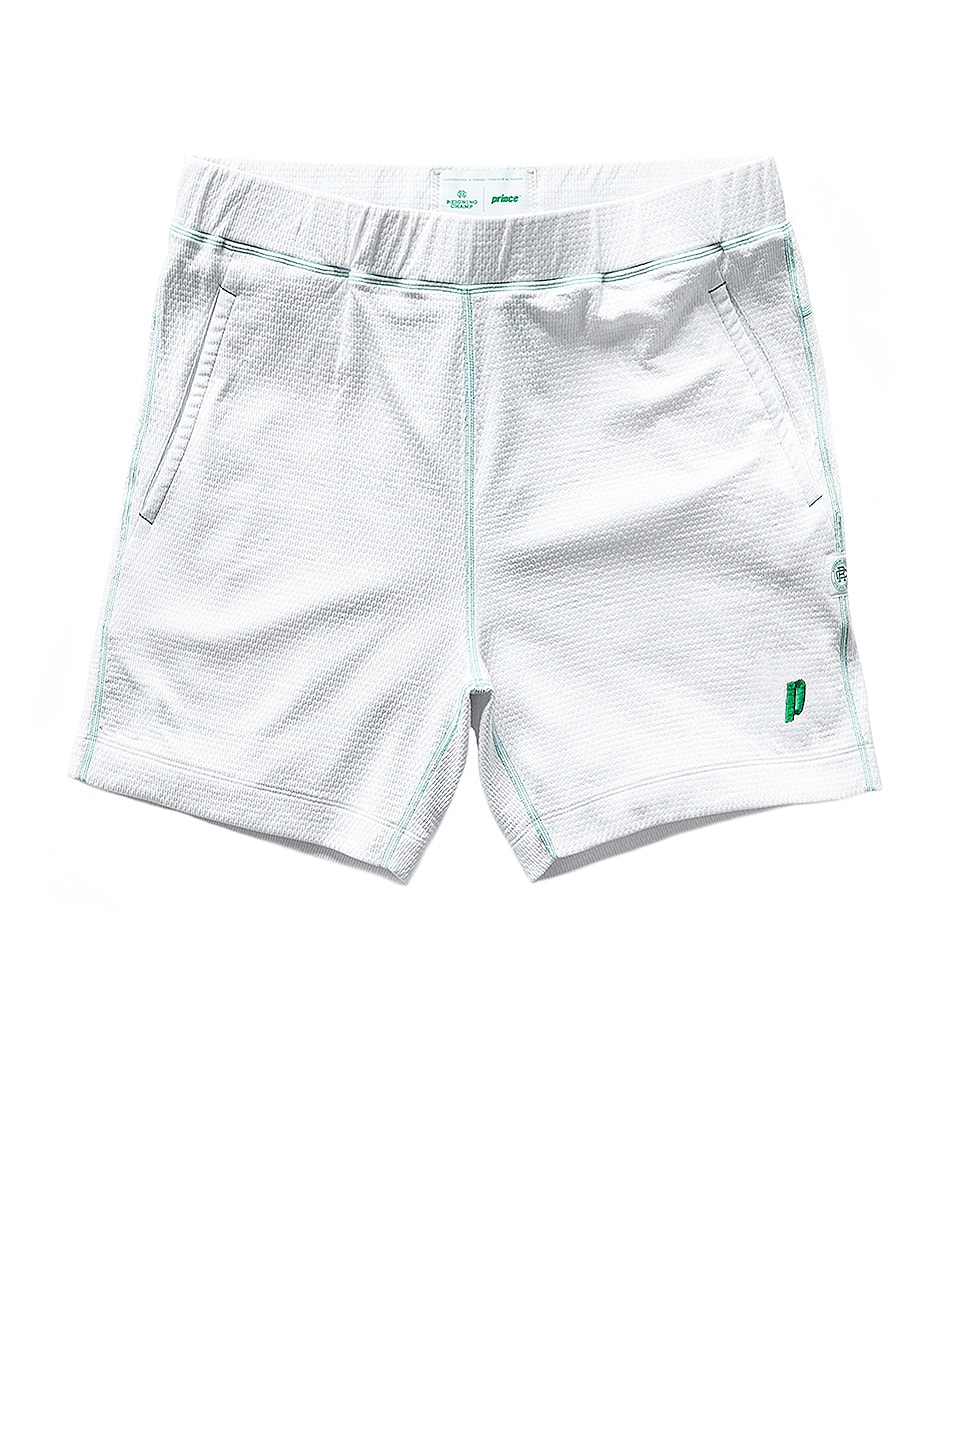 Image 1 of Reigning Champ X Prince Shorts in White